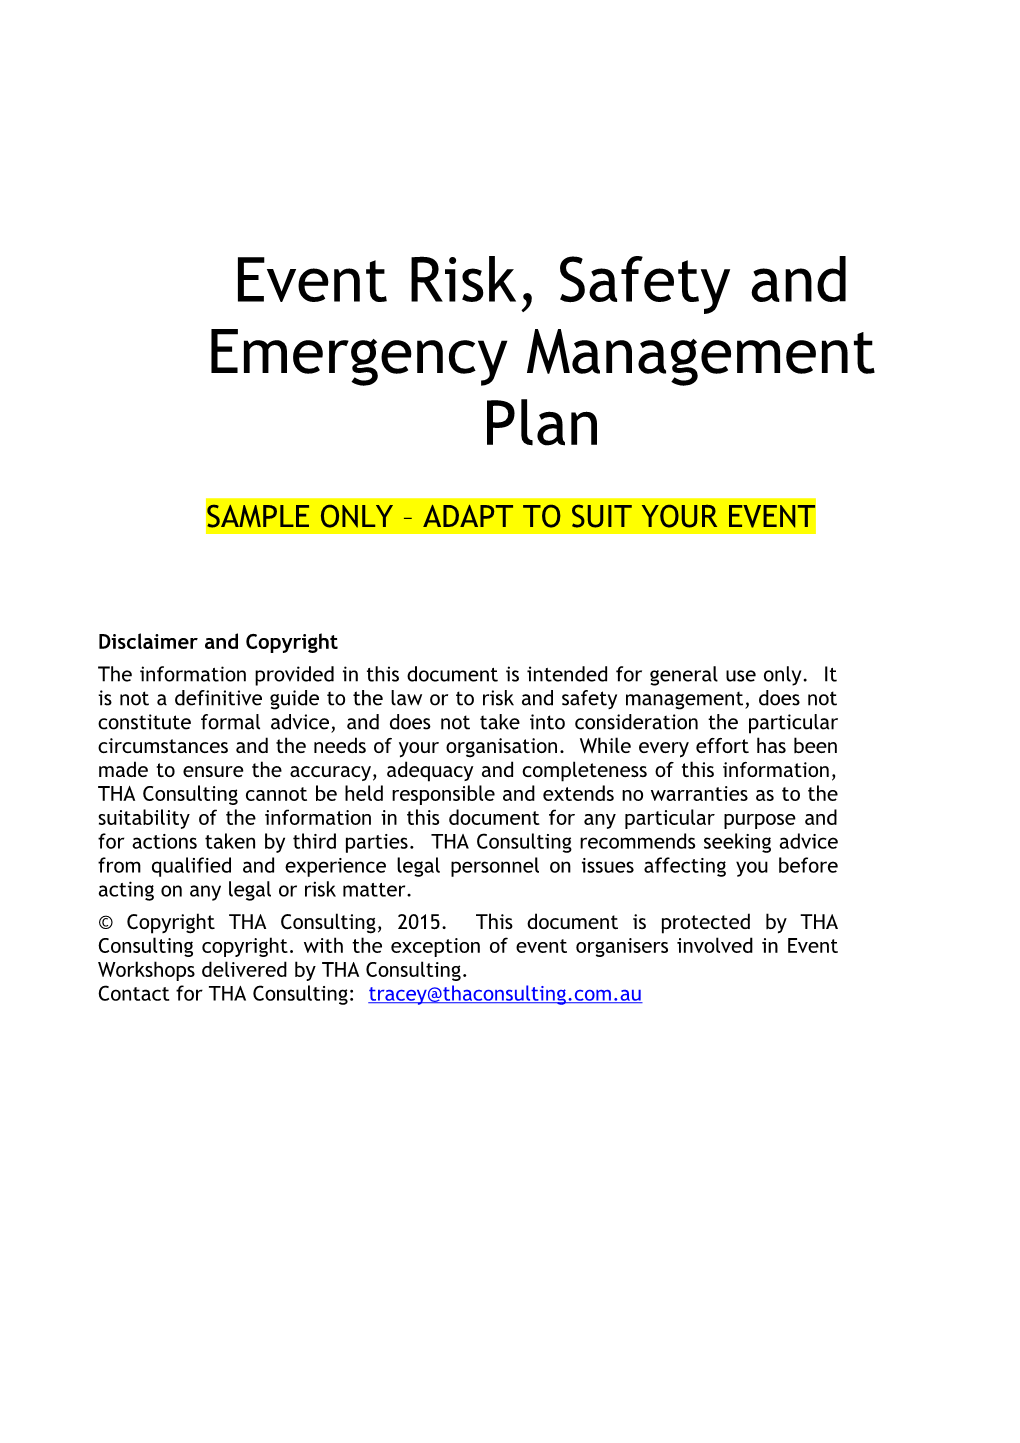 Event Risk, Safety and Emergency Management Plan